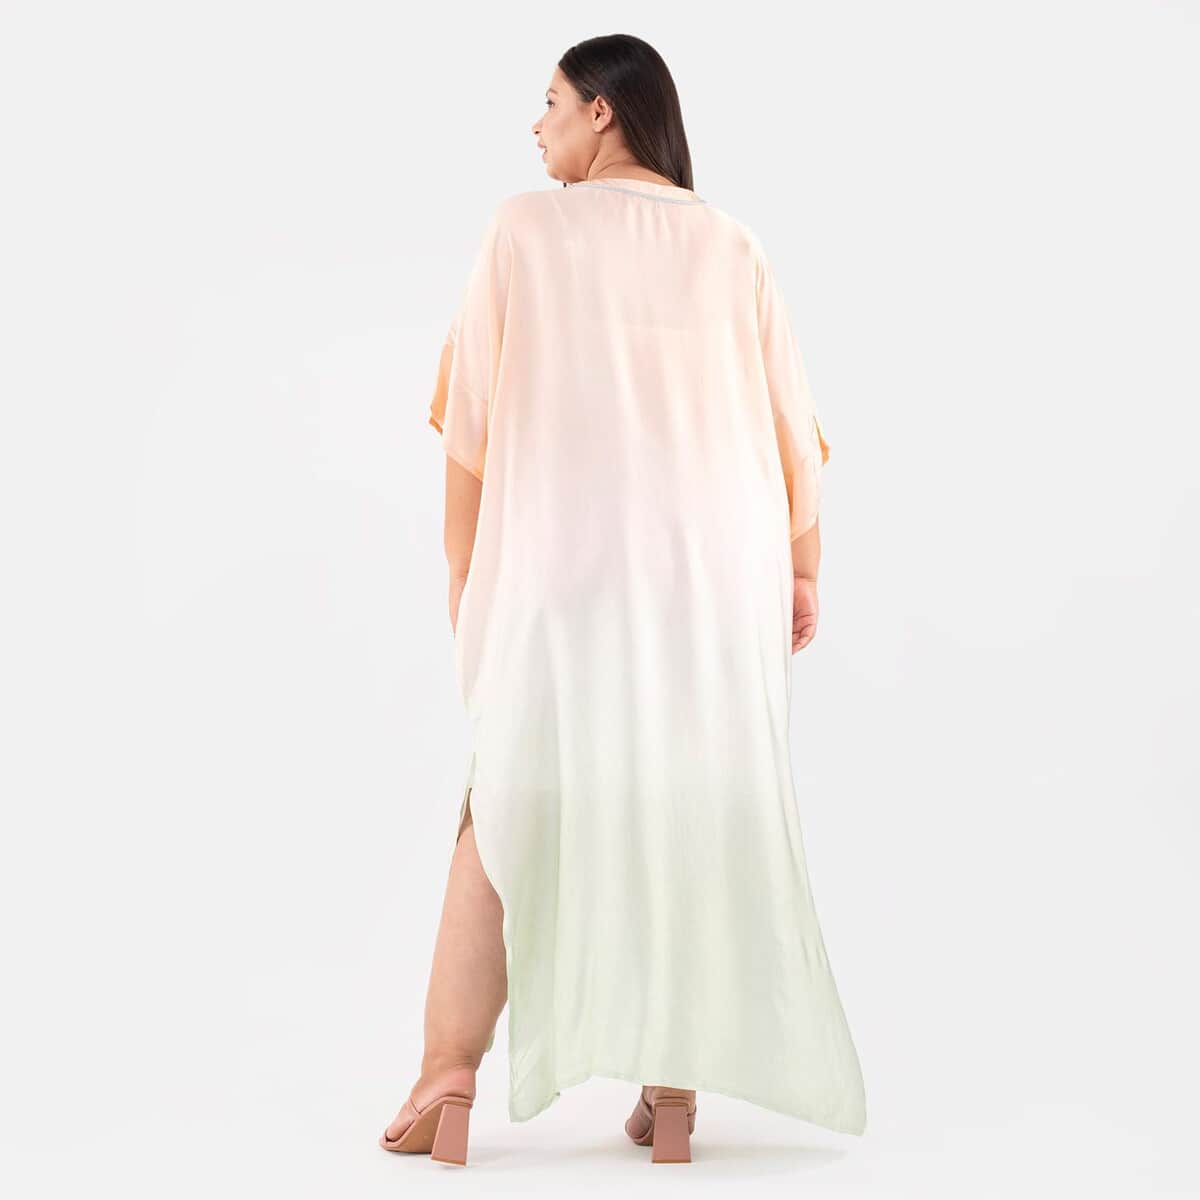 TAMSY Peach Tie-Dye Long Kaftan with Lace - One Size Fits Most image number 1